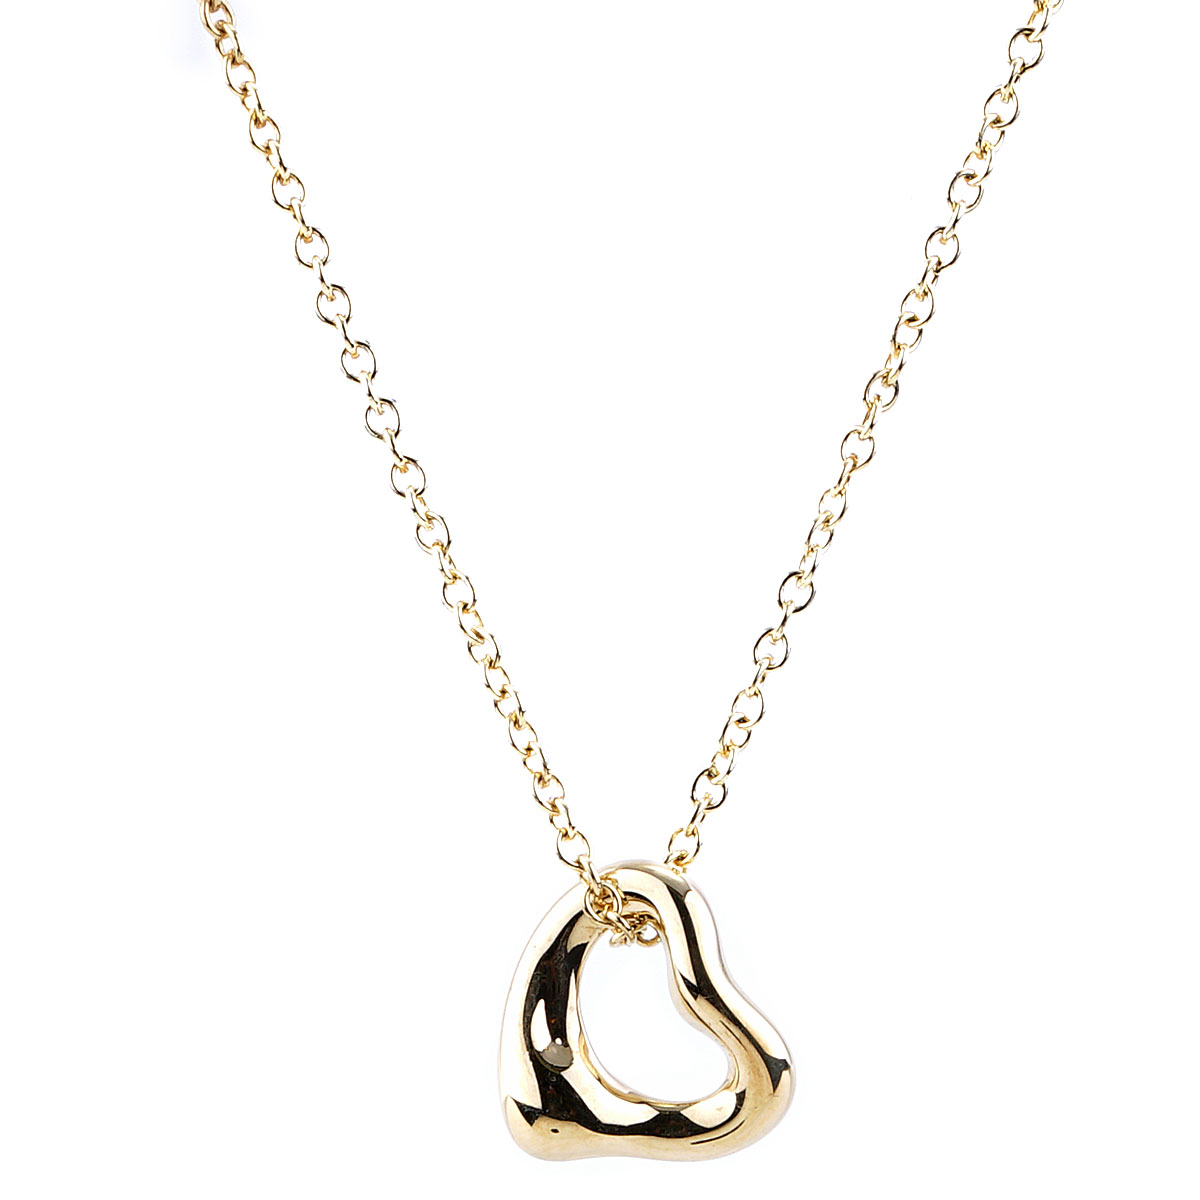 Elsa Peretti® Open Heart pendant in 18k rose gold. More sizes available. |  Tiffany & Co.